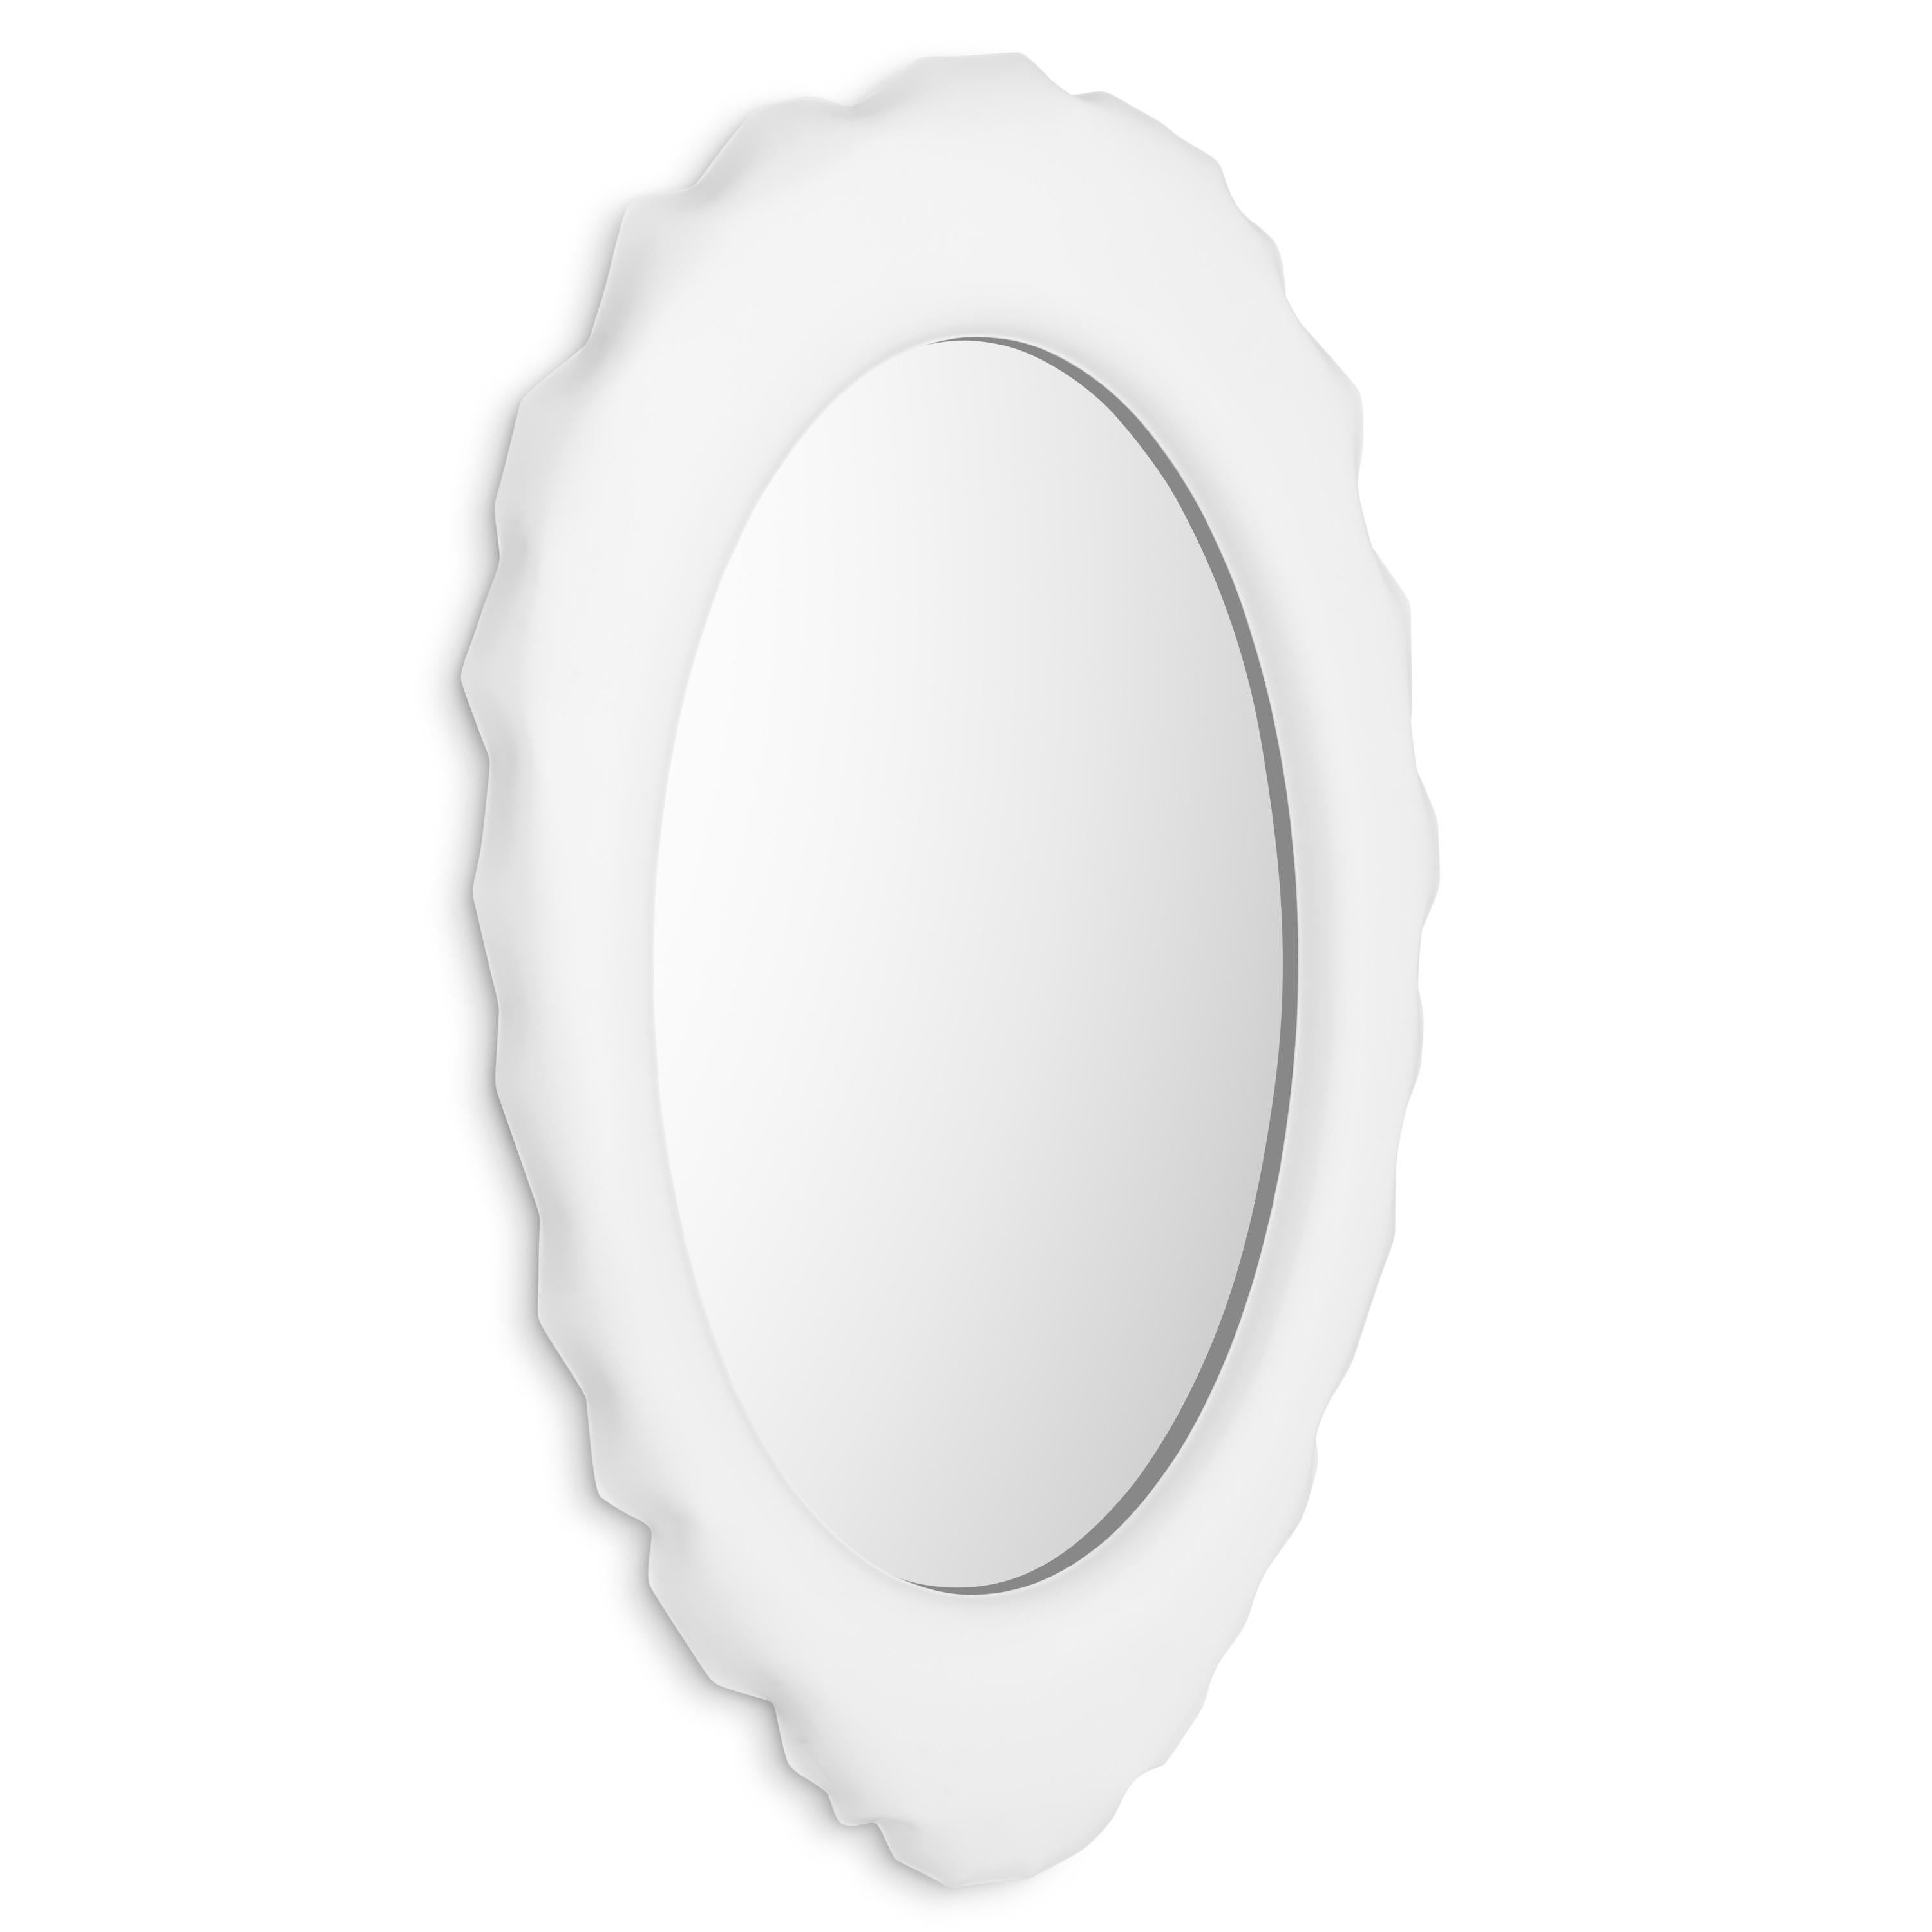 Organic Modern Contemporary Wall Mirror 'Silex' by Zieta, Stainless Steel For Sale